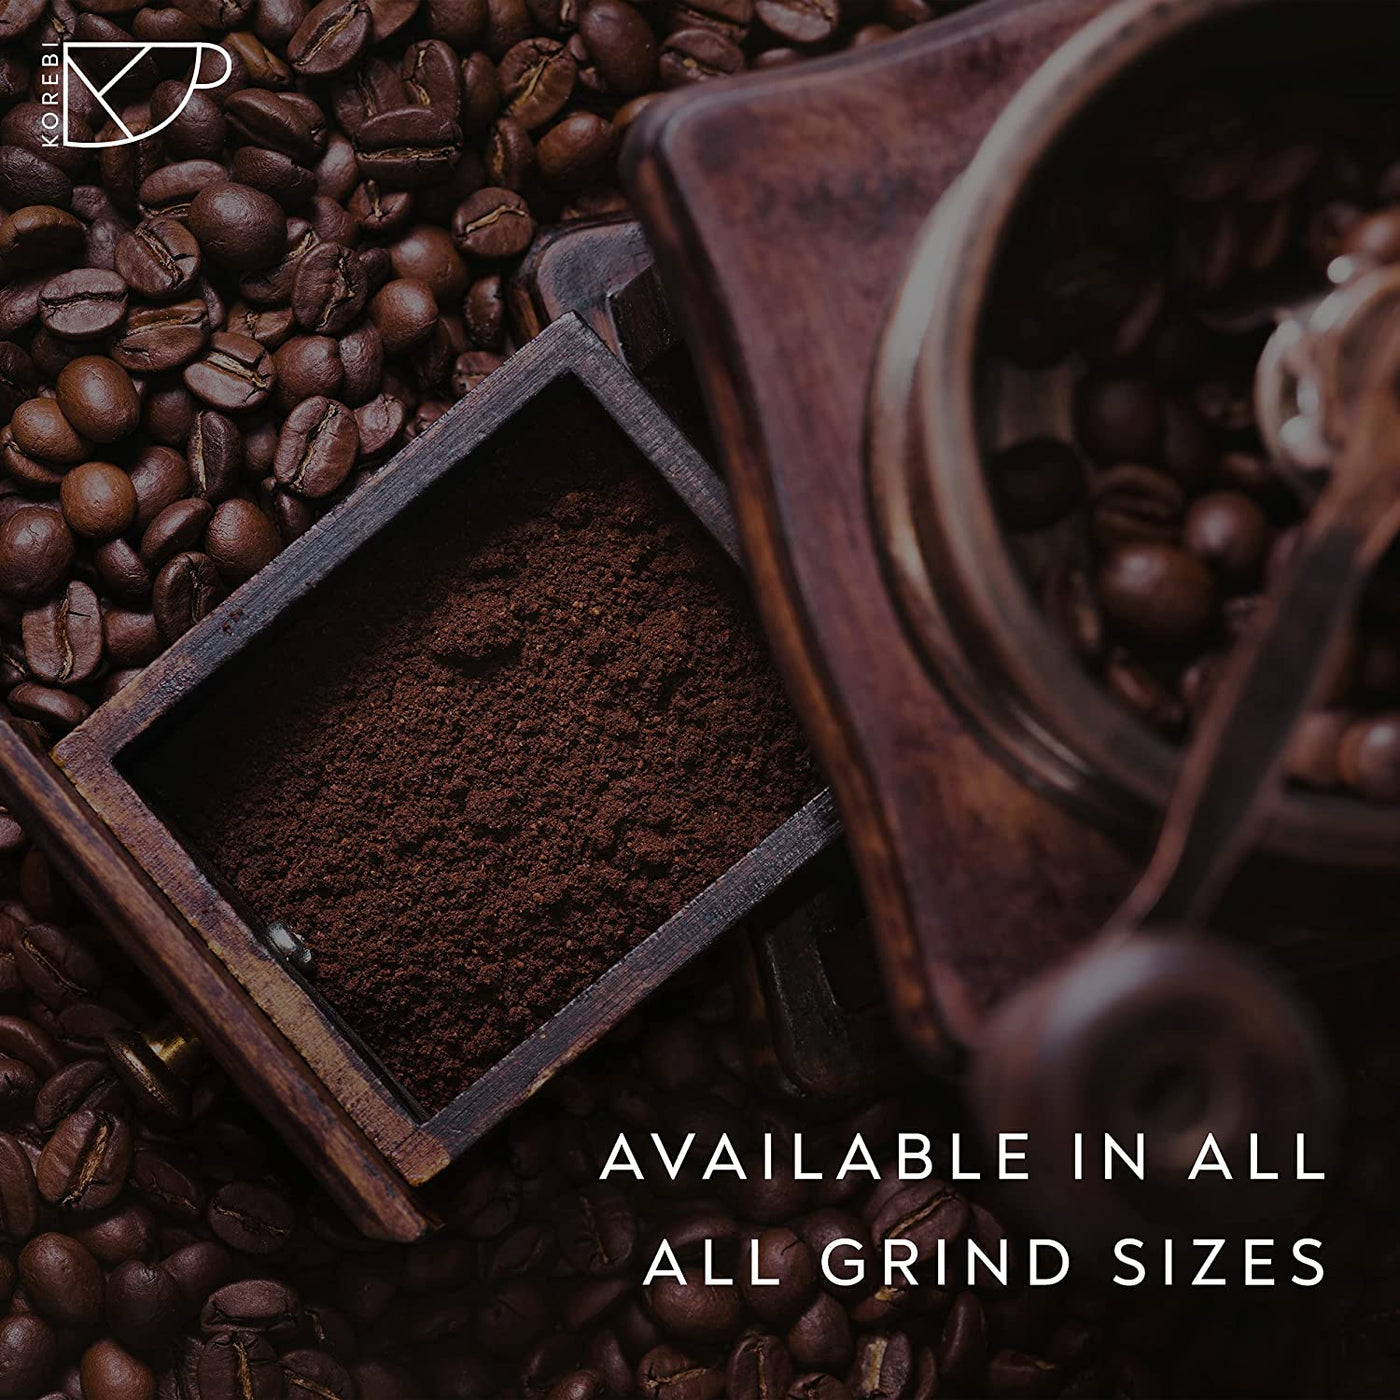 Tropical Haze Coffee | Medium Roast with Floral and Citrus Flavors